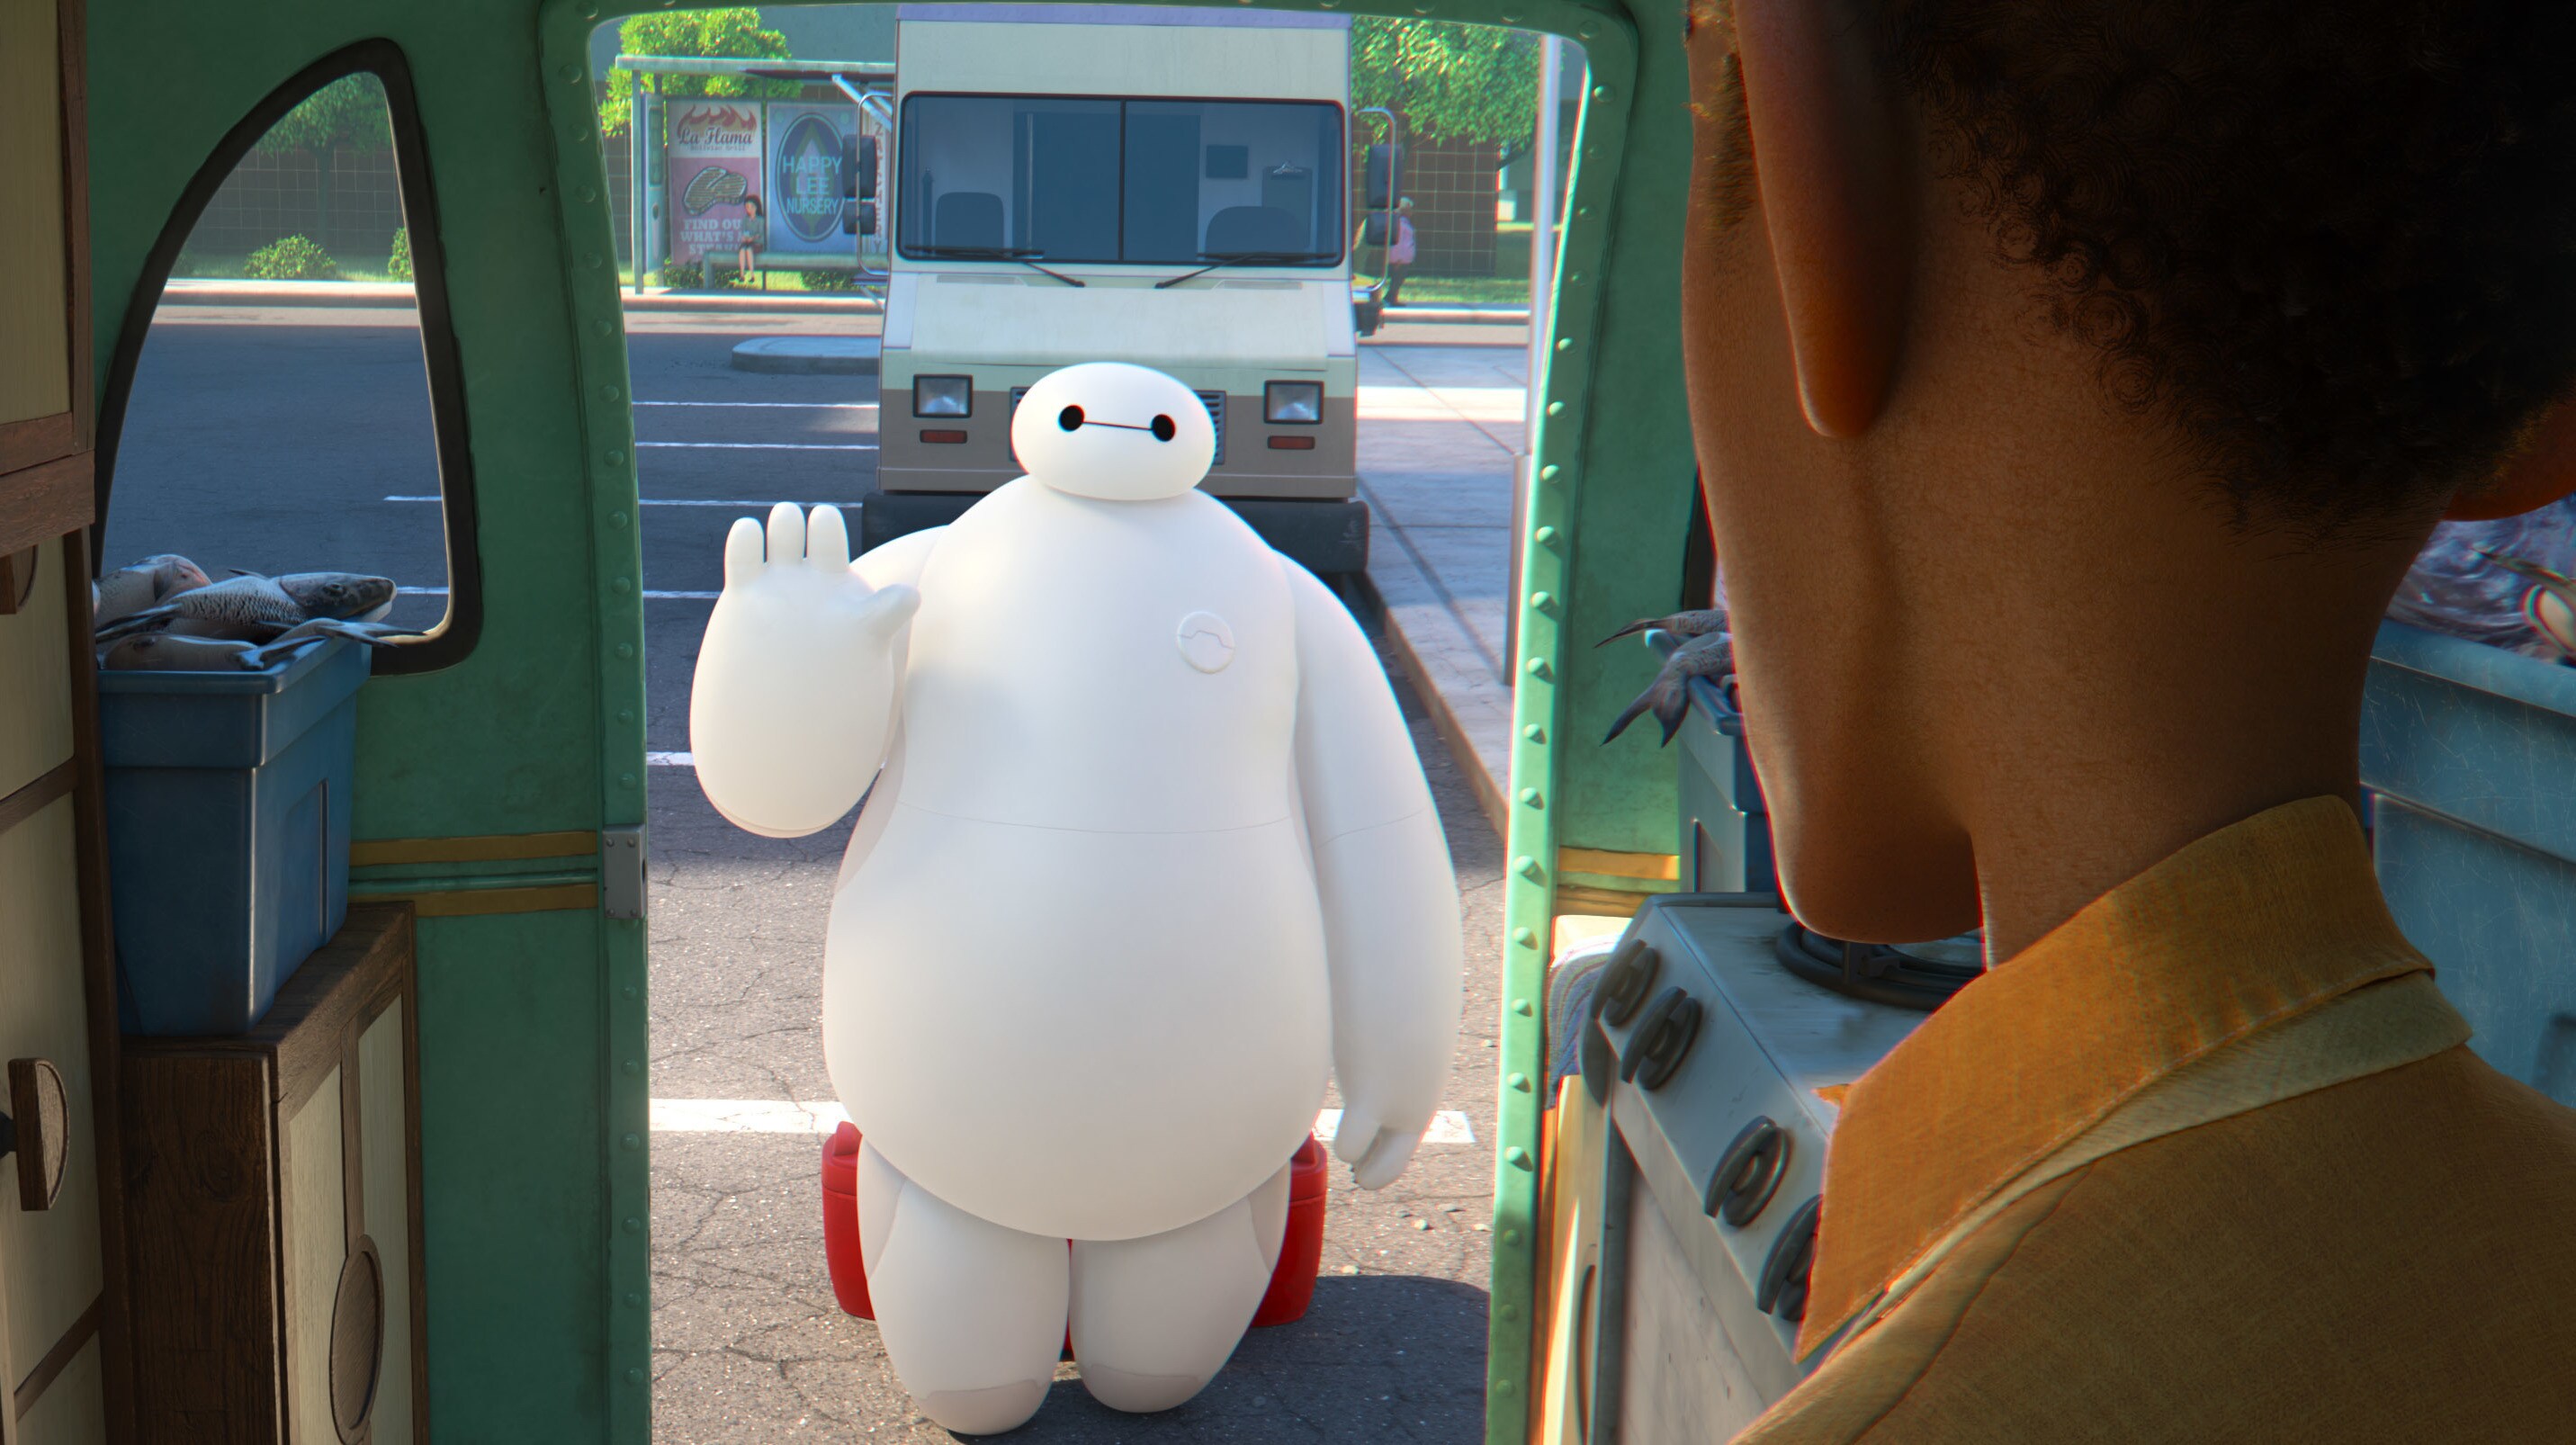 Walt Disney Animation Studios’ “Baymax!” returns to the fantastical city of San Fransokyo where the affable, inflatable, inimitable healthcare companion robot, Baymax (voice of Scott Adsit), sets out to do what he was programmed to do: help others. The series of healthcare capers introduces extraordinary characters who need Baymax’s signature approach to healing in more ways than they realize. In episode 4, Mbita (voice of Jaboukie Young-White) serves up a family favorite until an unexpected allergy and Baymax push him toward change. “Baymax!” streams exclusively on Disney+ starting June 29, 2022. © 2022 Disney. All Rights Reserved.